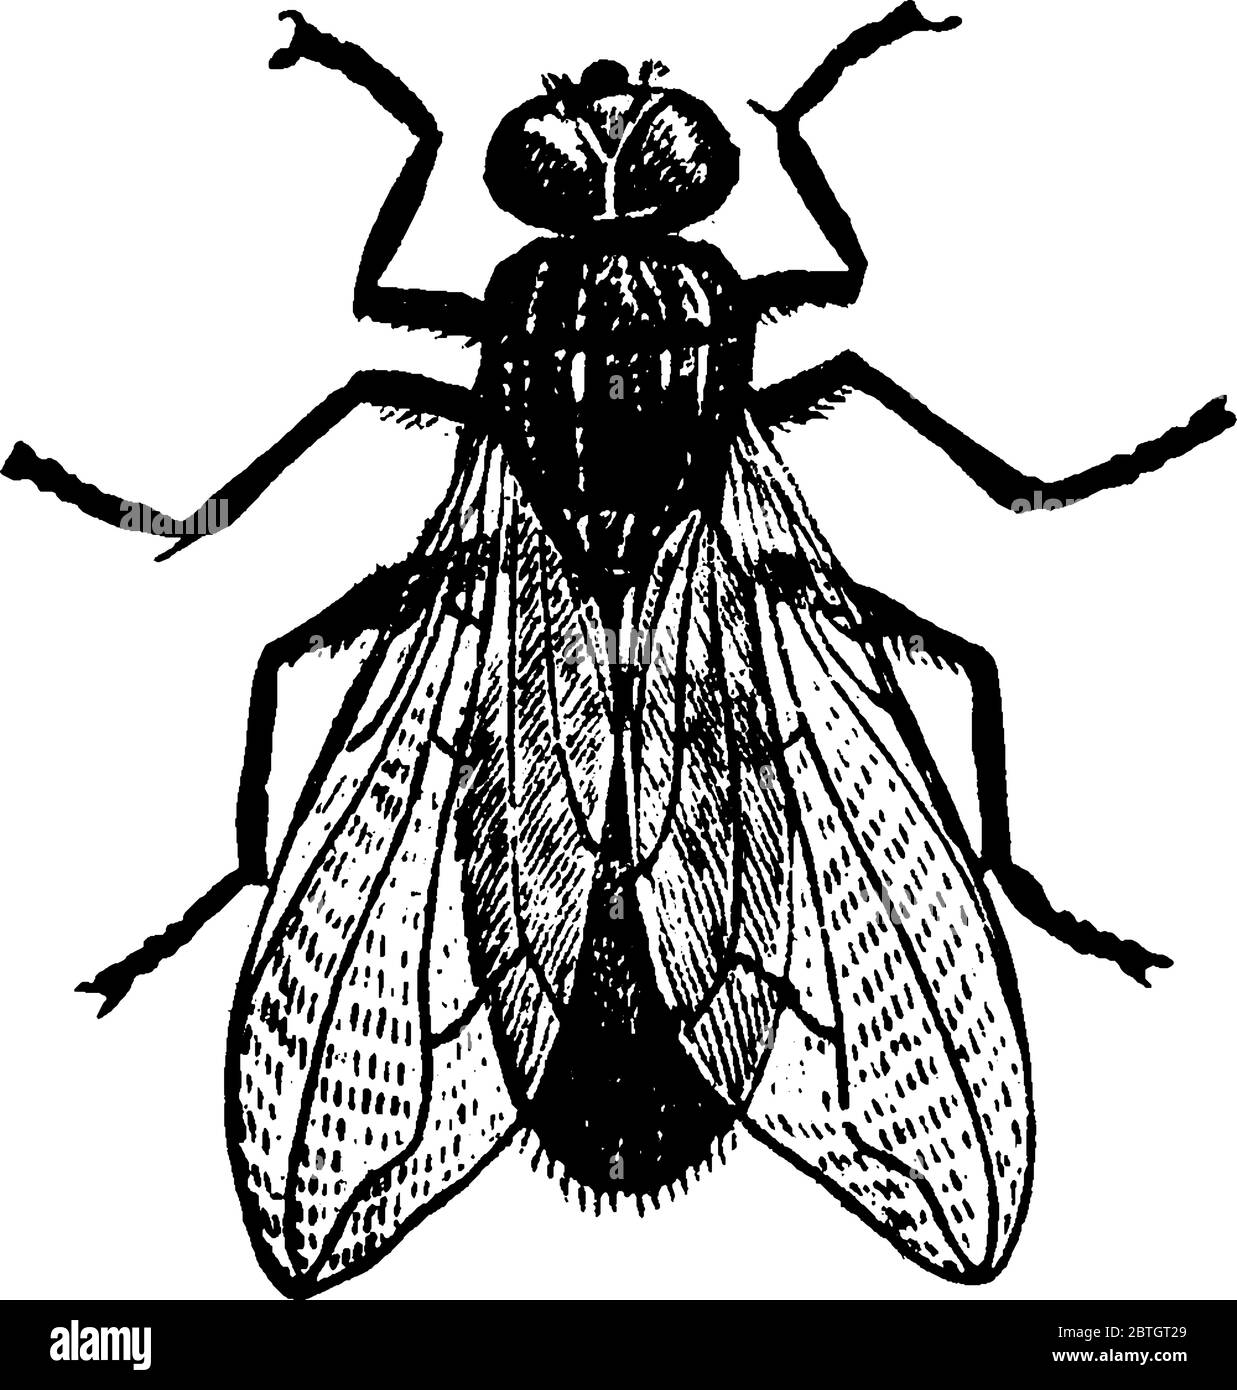 A typical representation of an insect flies with a pair of functional wings for flight and a pair of vestigial hindwings called halteres for balance, Stock Vector